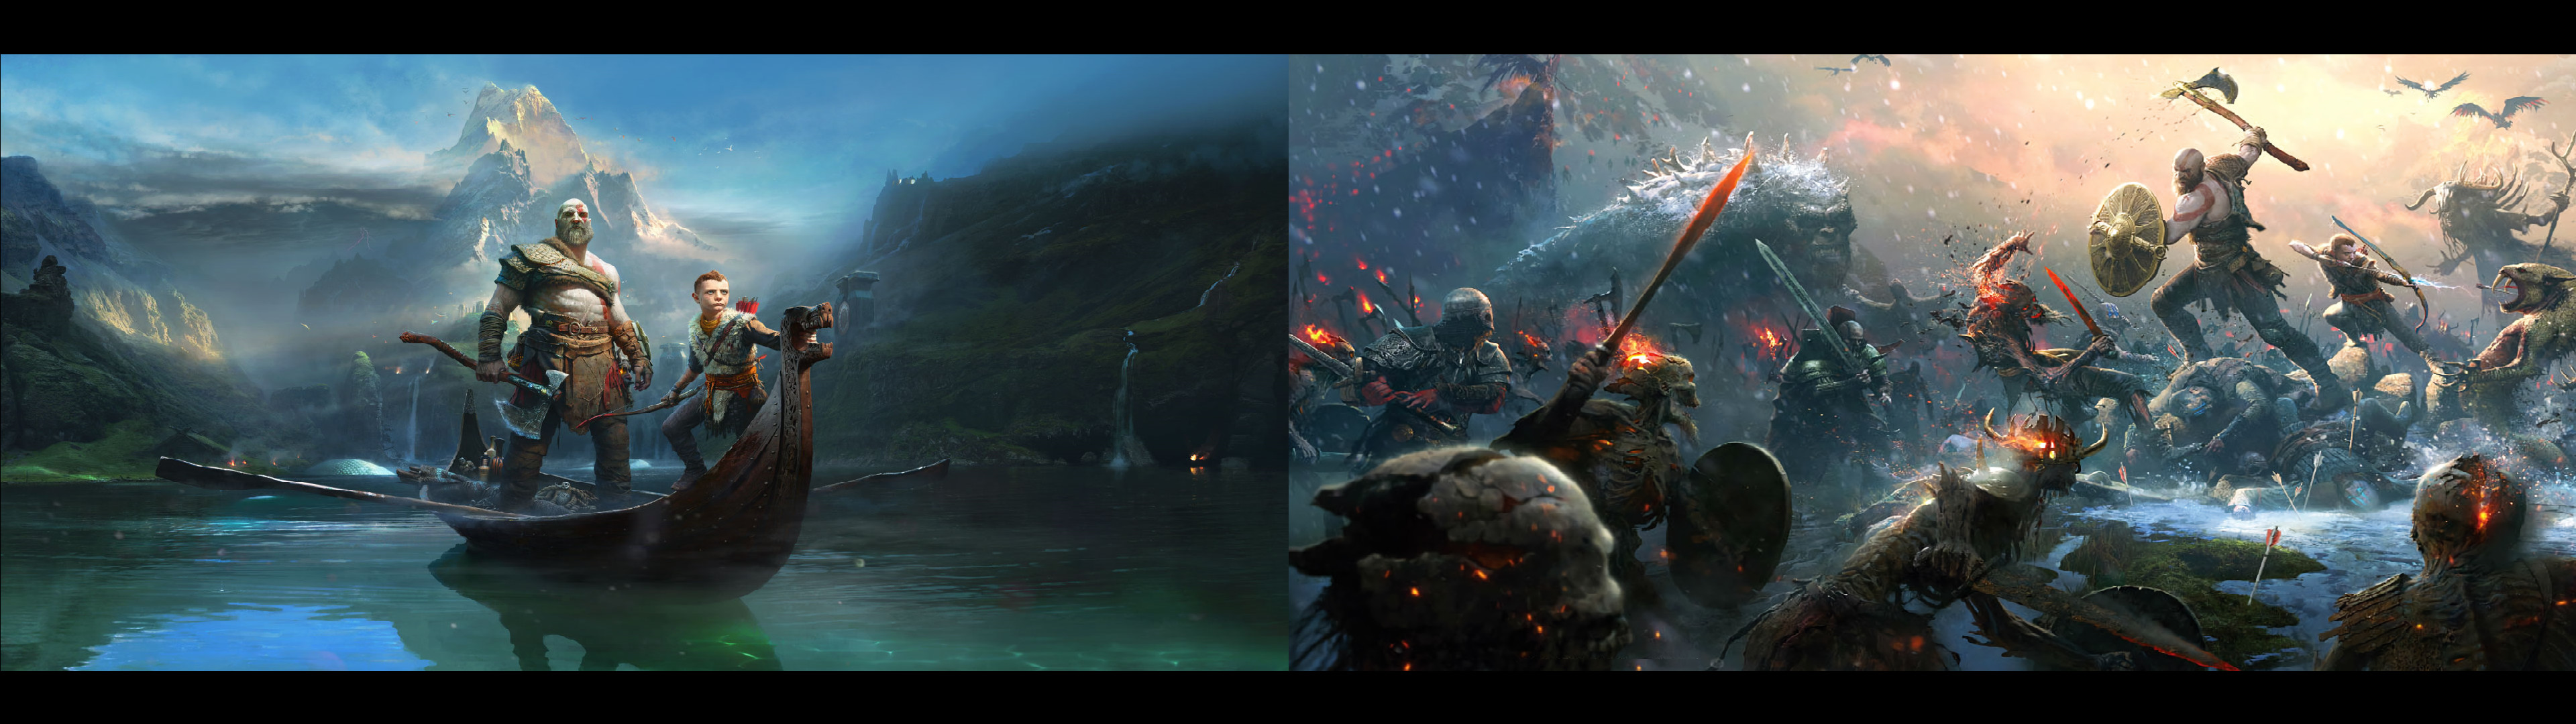 3840x1080 God of War. I couldn't find a dual monitor wallpaper, so I made one.  []Dual ...